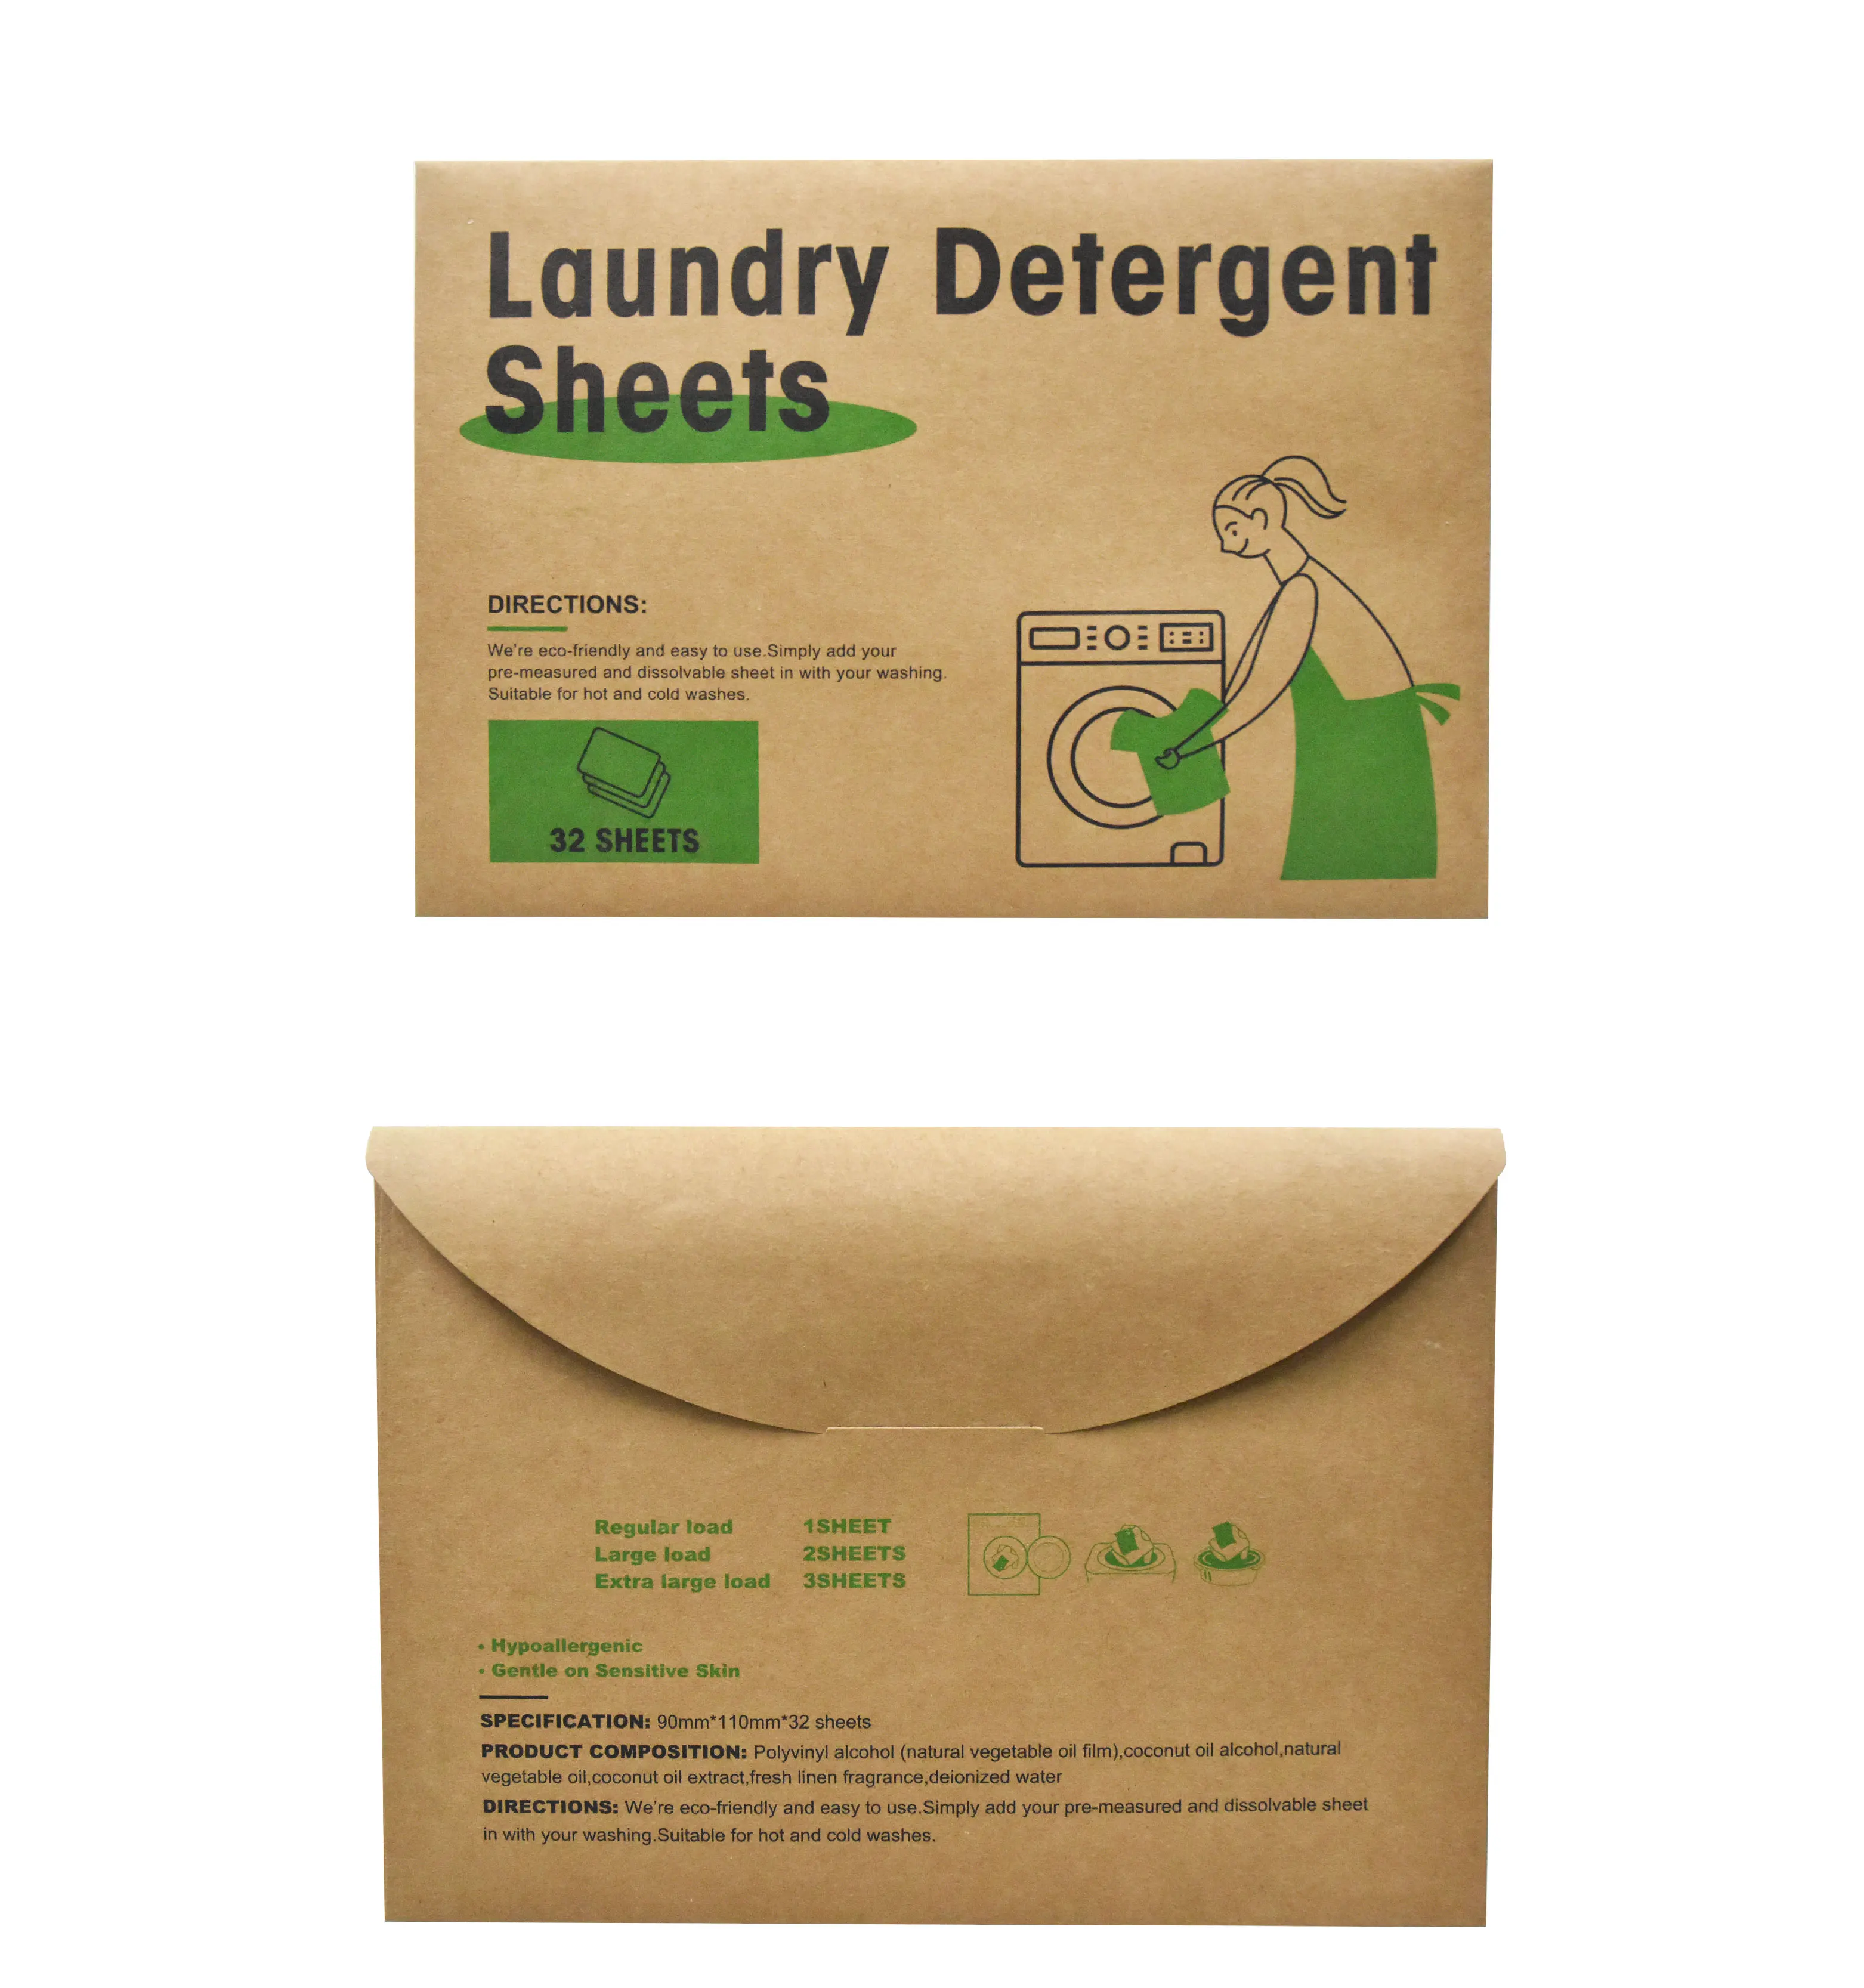 earthwise laundry detergent sheets